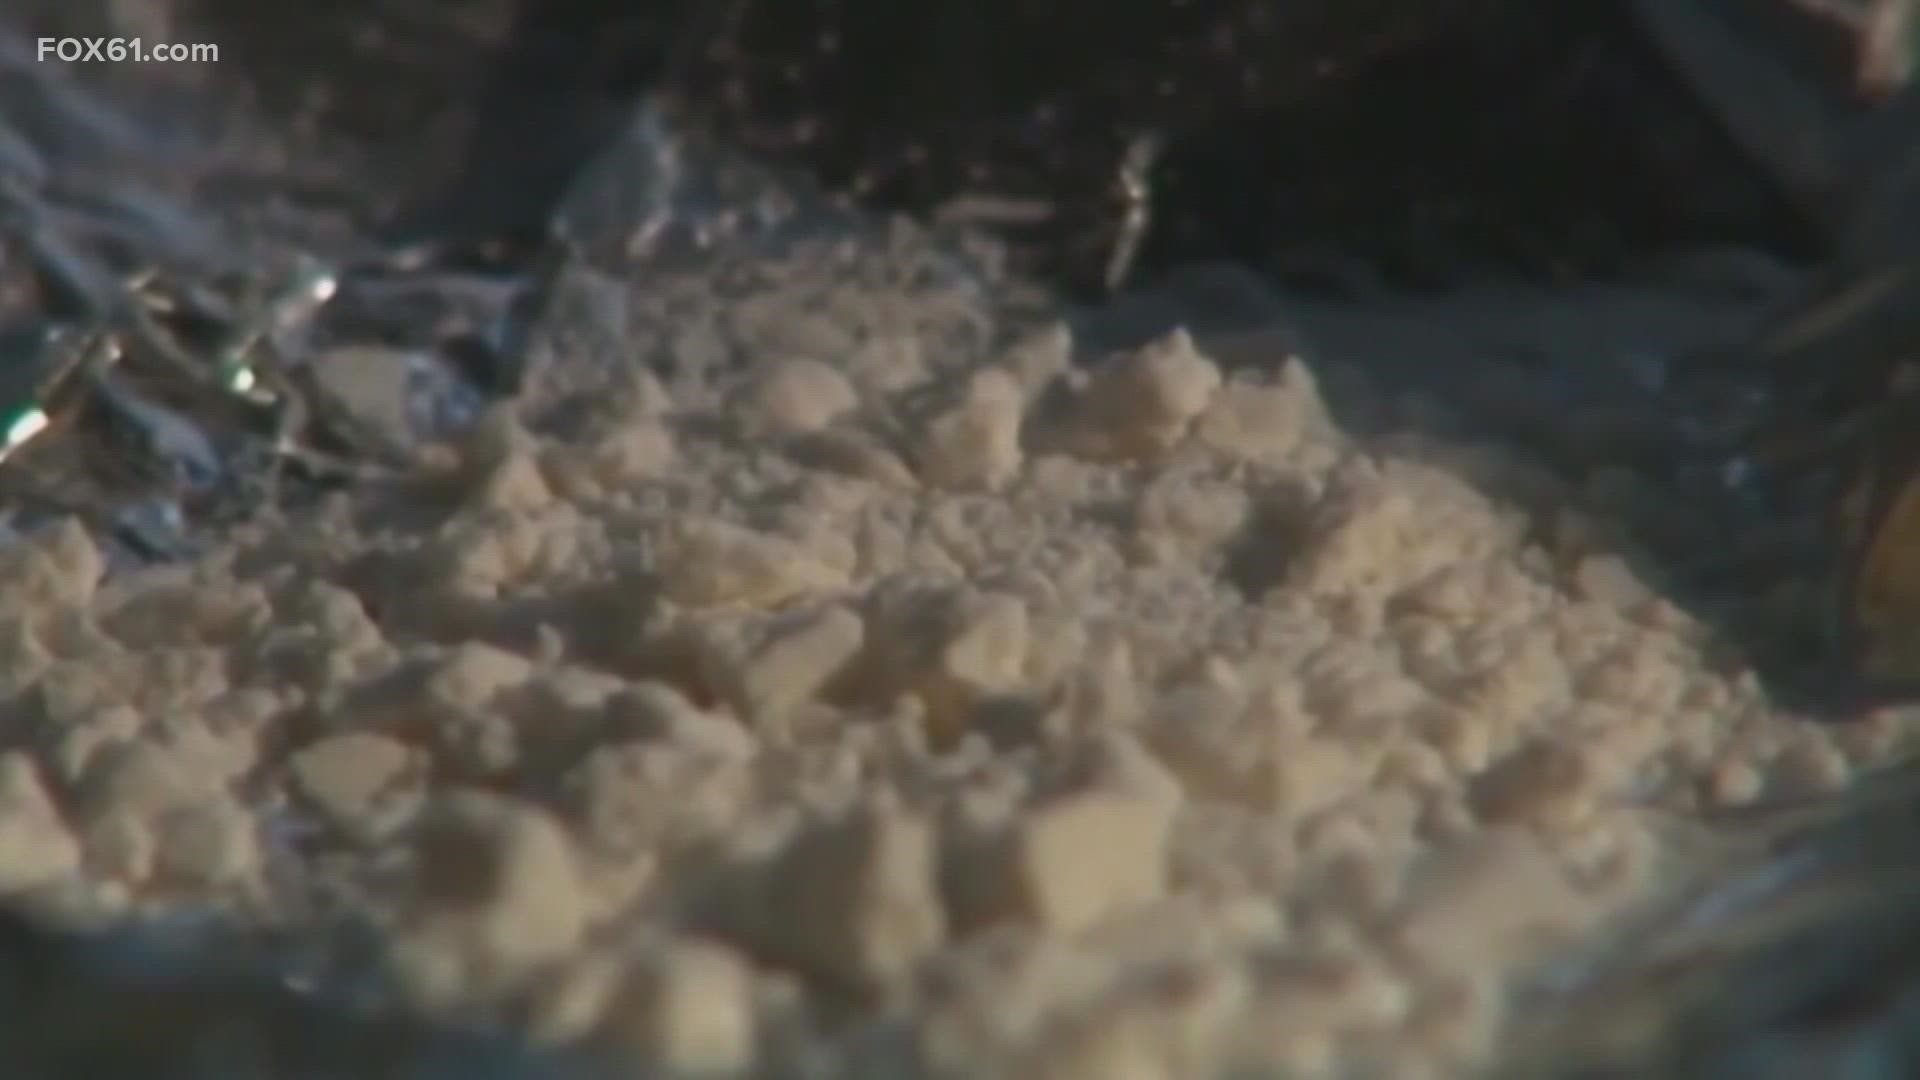 This deadly drug is getting more prevalent and potent. FOX61's Julia LeBlanc has an in-depth report.